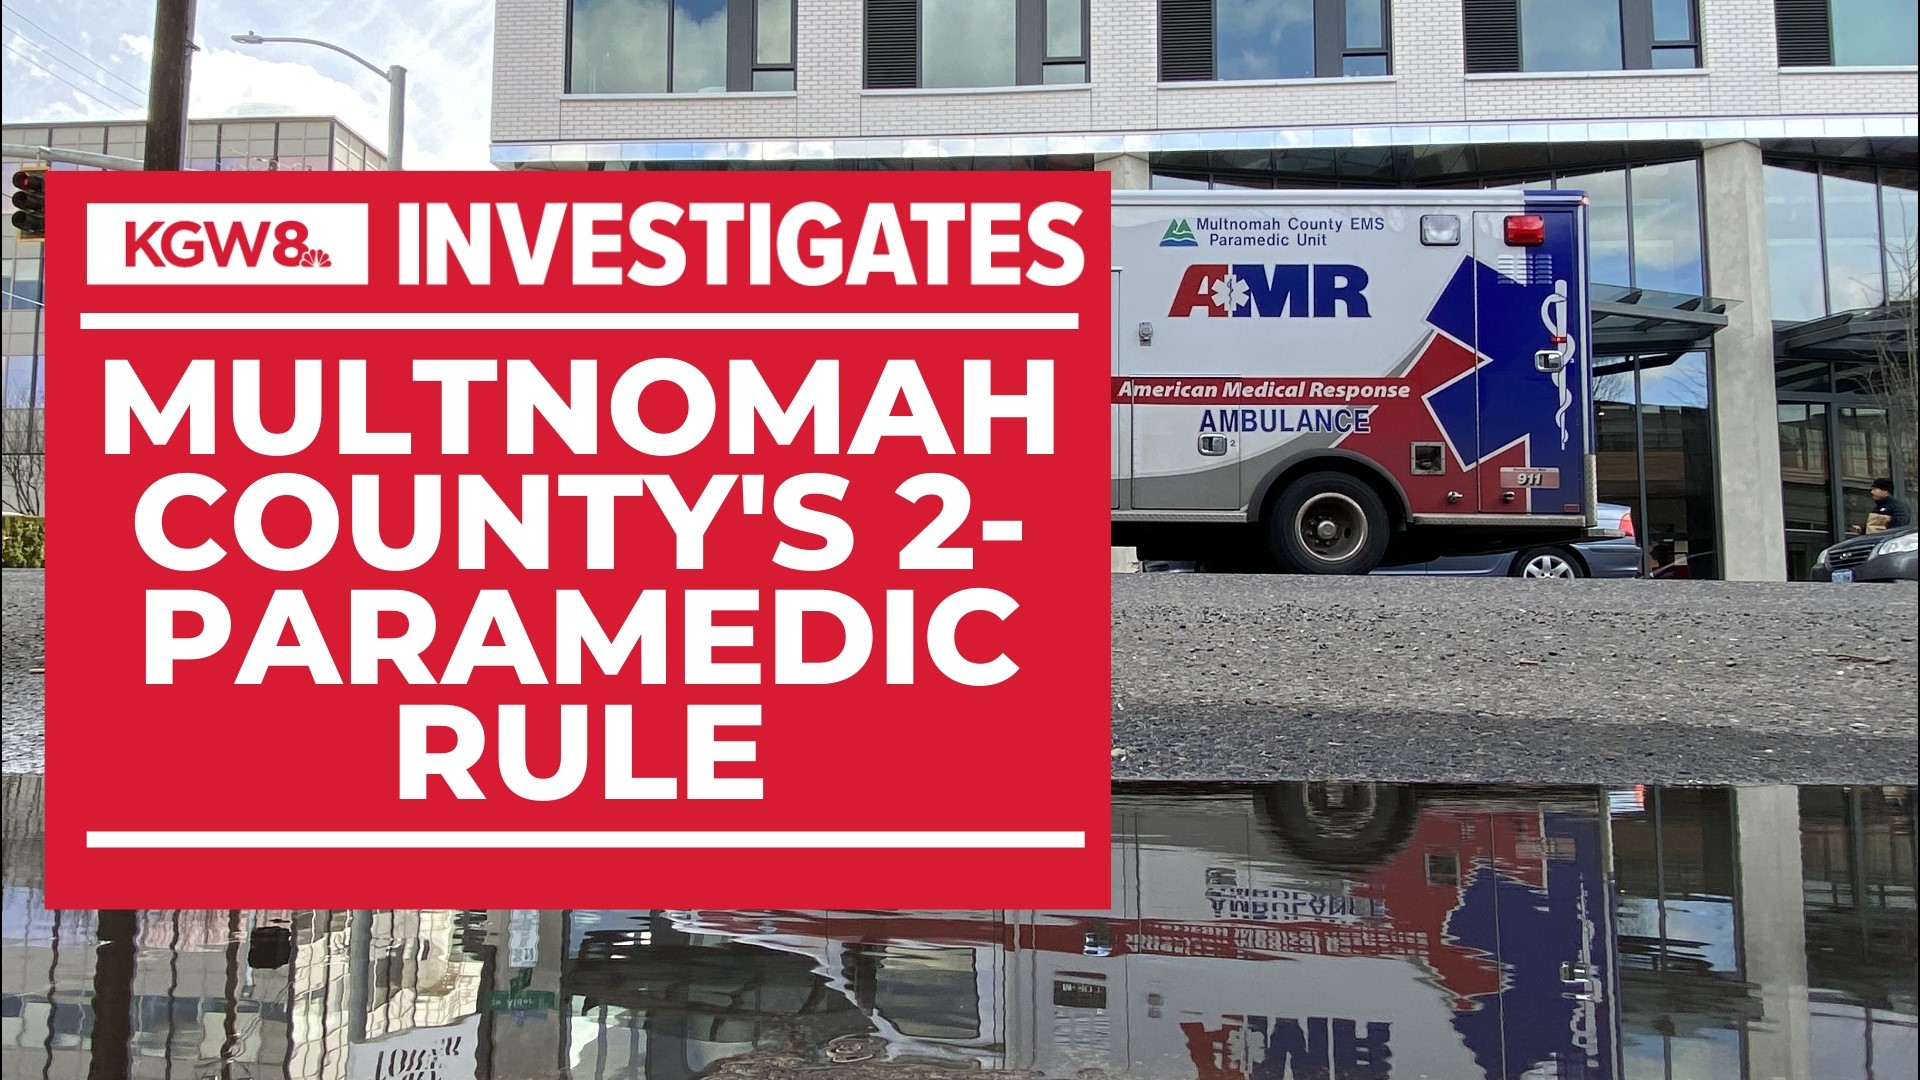 Ambulance provider AMR says the unusual rule is contributing to staffing shortages that hurt response times. Paramedics say it's there for a reason.